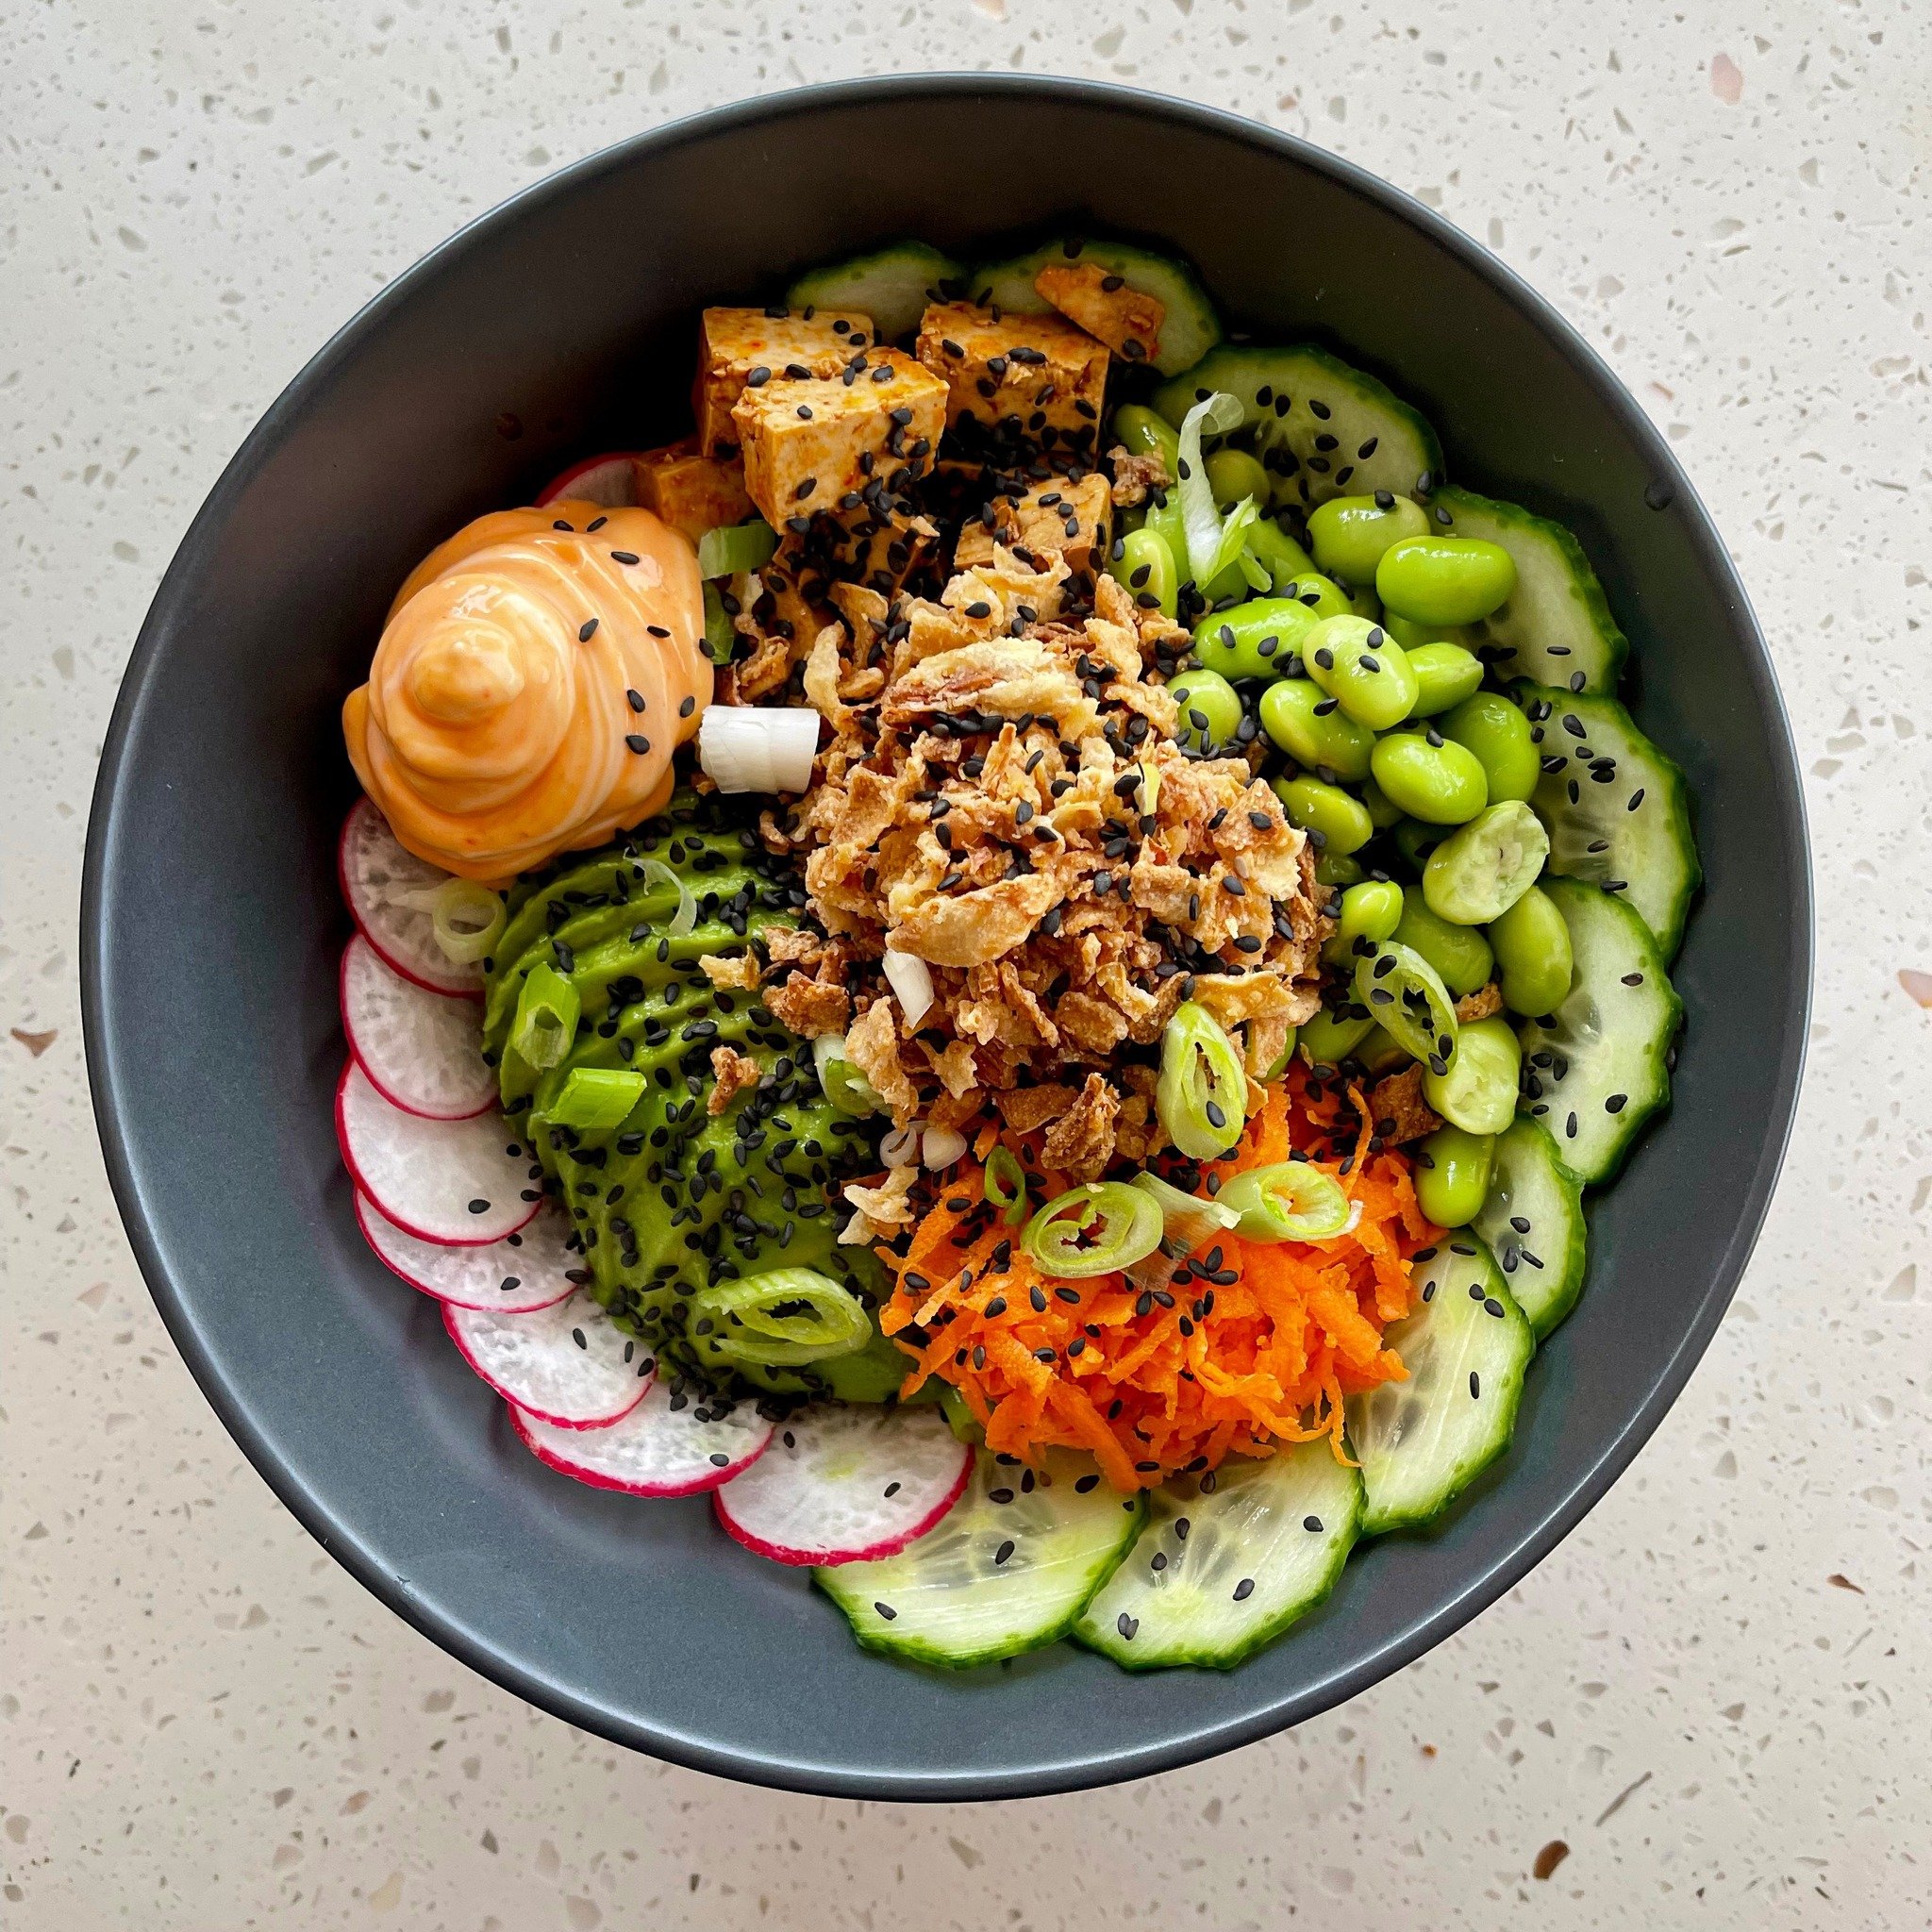 🍣🥗 Tuna, salmon, or tofu &ndash; what&rsquo;s your favorite poke bowl? 🥢 Can&rsquo;t decide? Let us know in the comments below! 🌟🍽️ WE ARE OPEN AS NORMAL TODAY! 

#bankholiday #health #poke #pokebowl